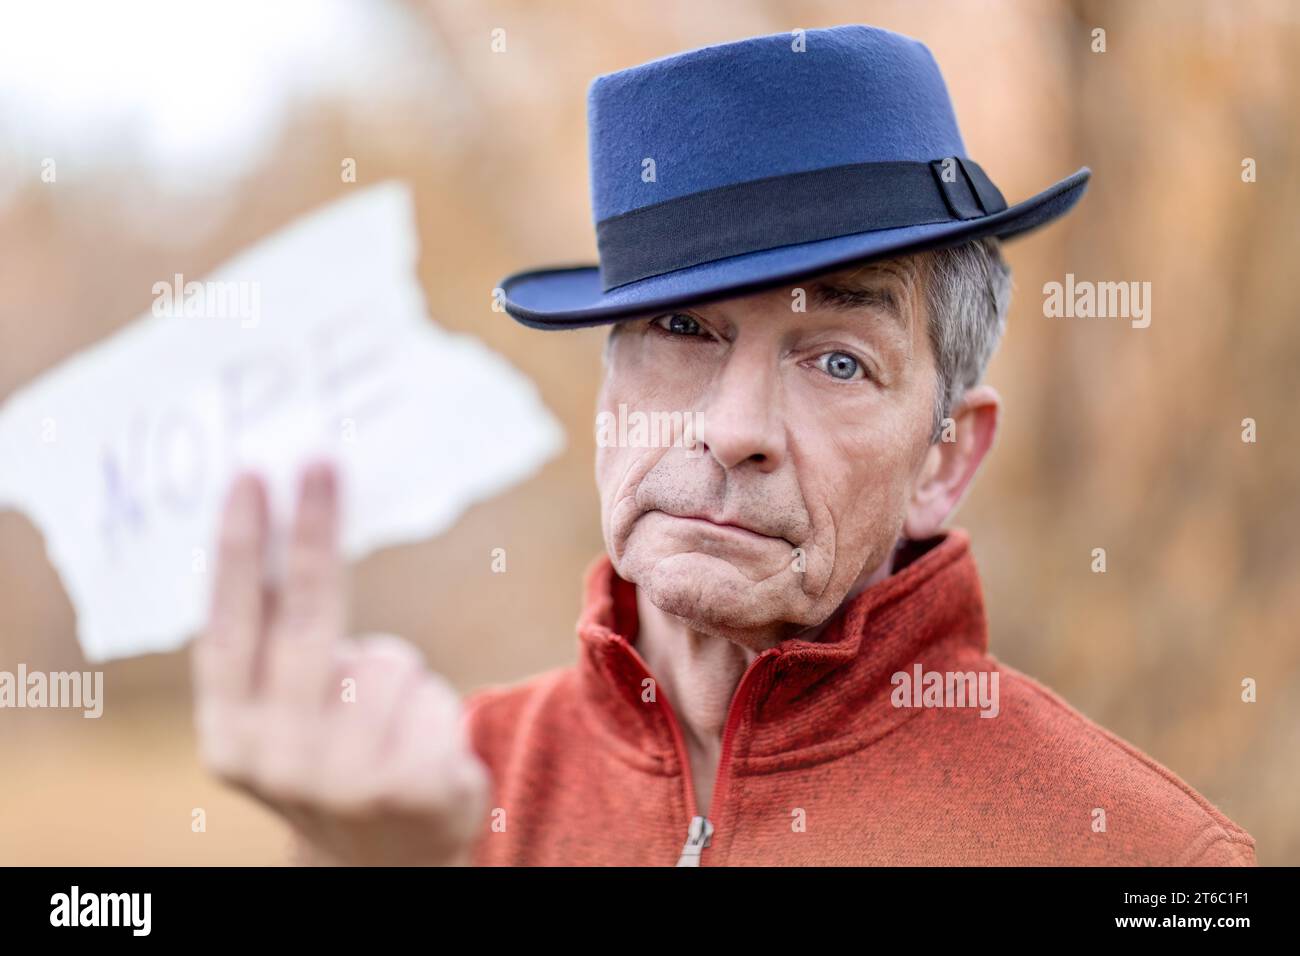 Head portrait of an elderly man holding a sign, text space Stock Photo